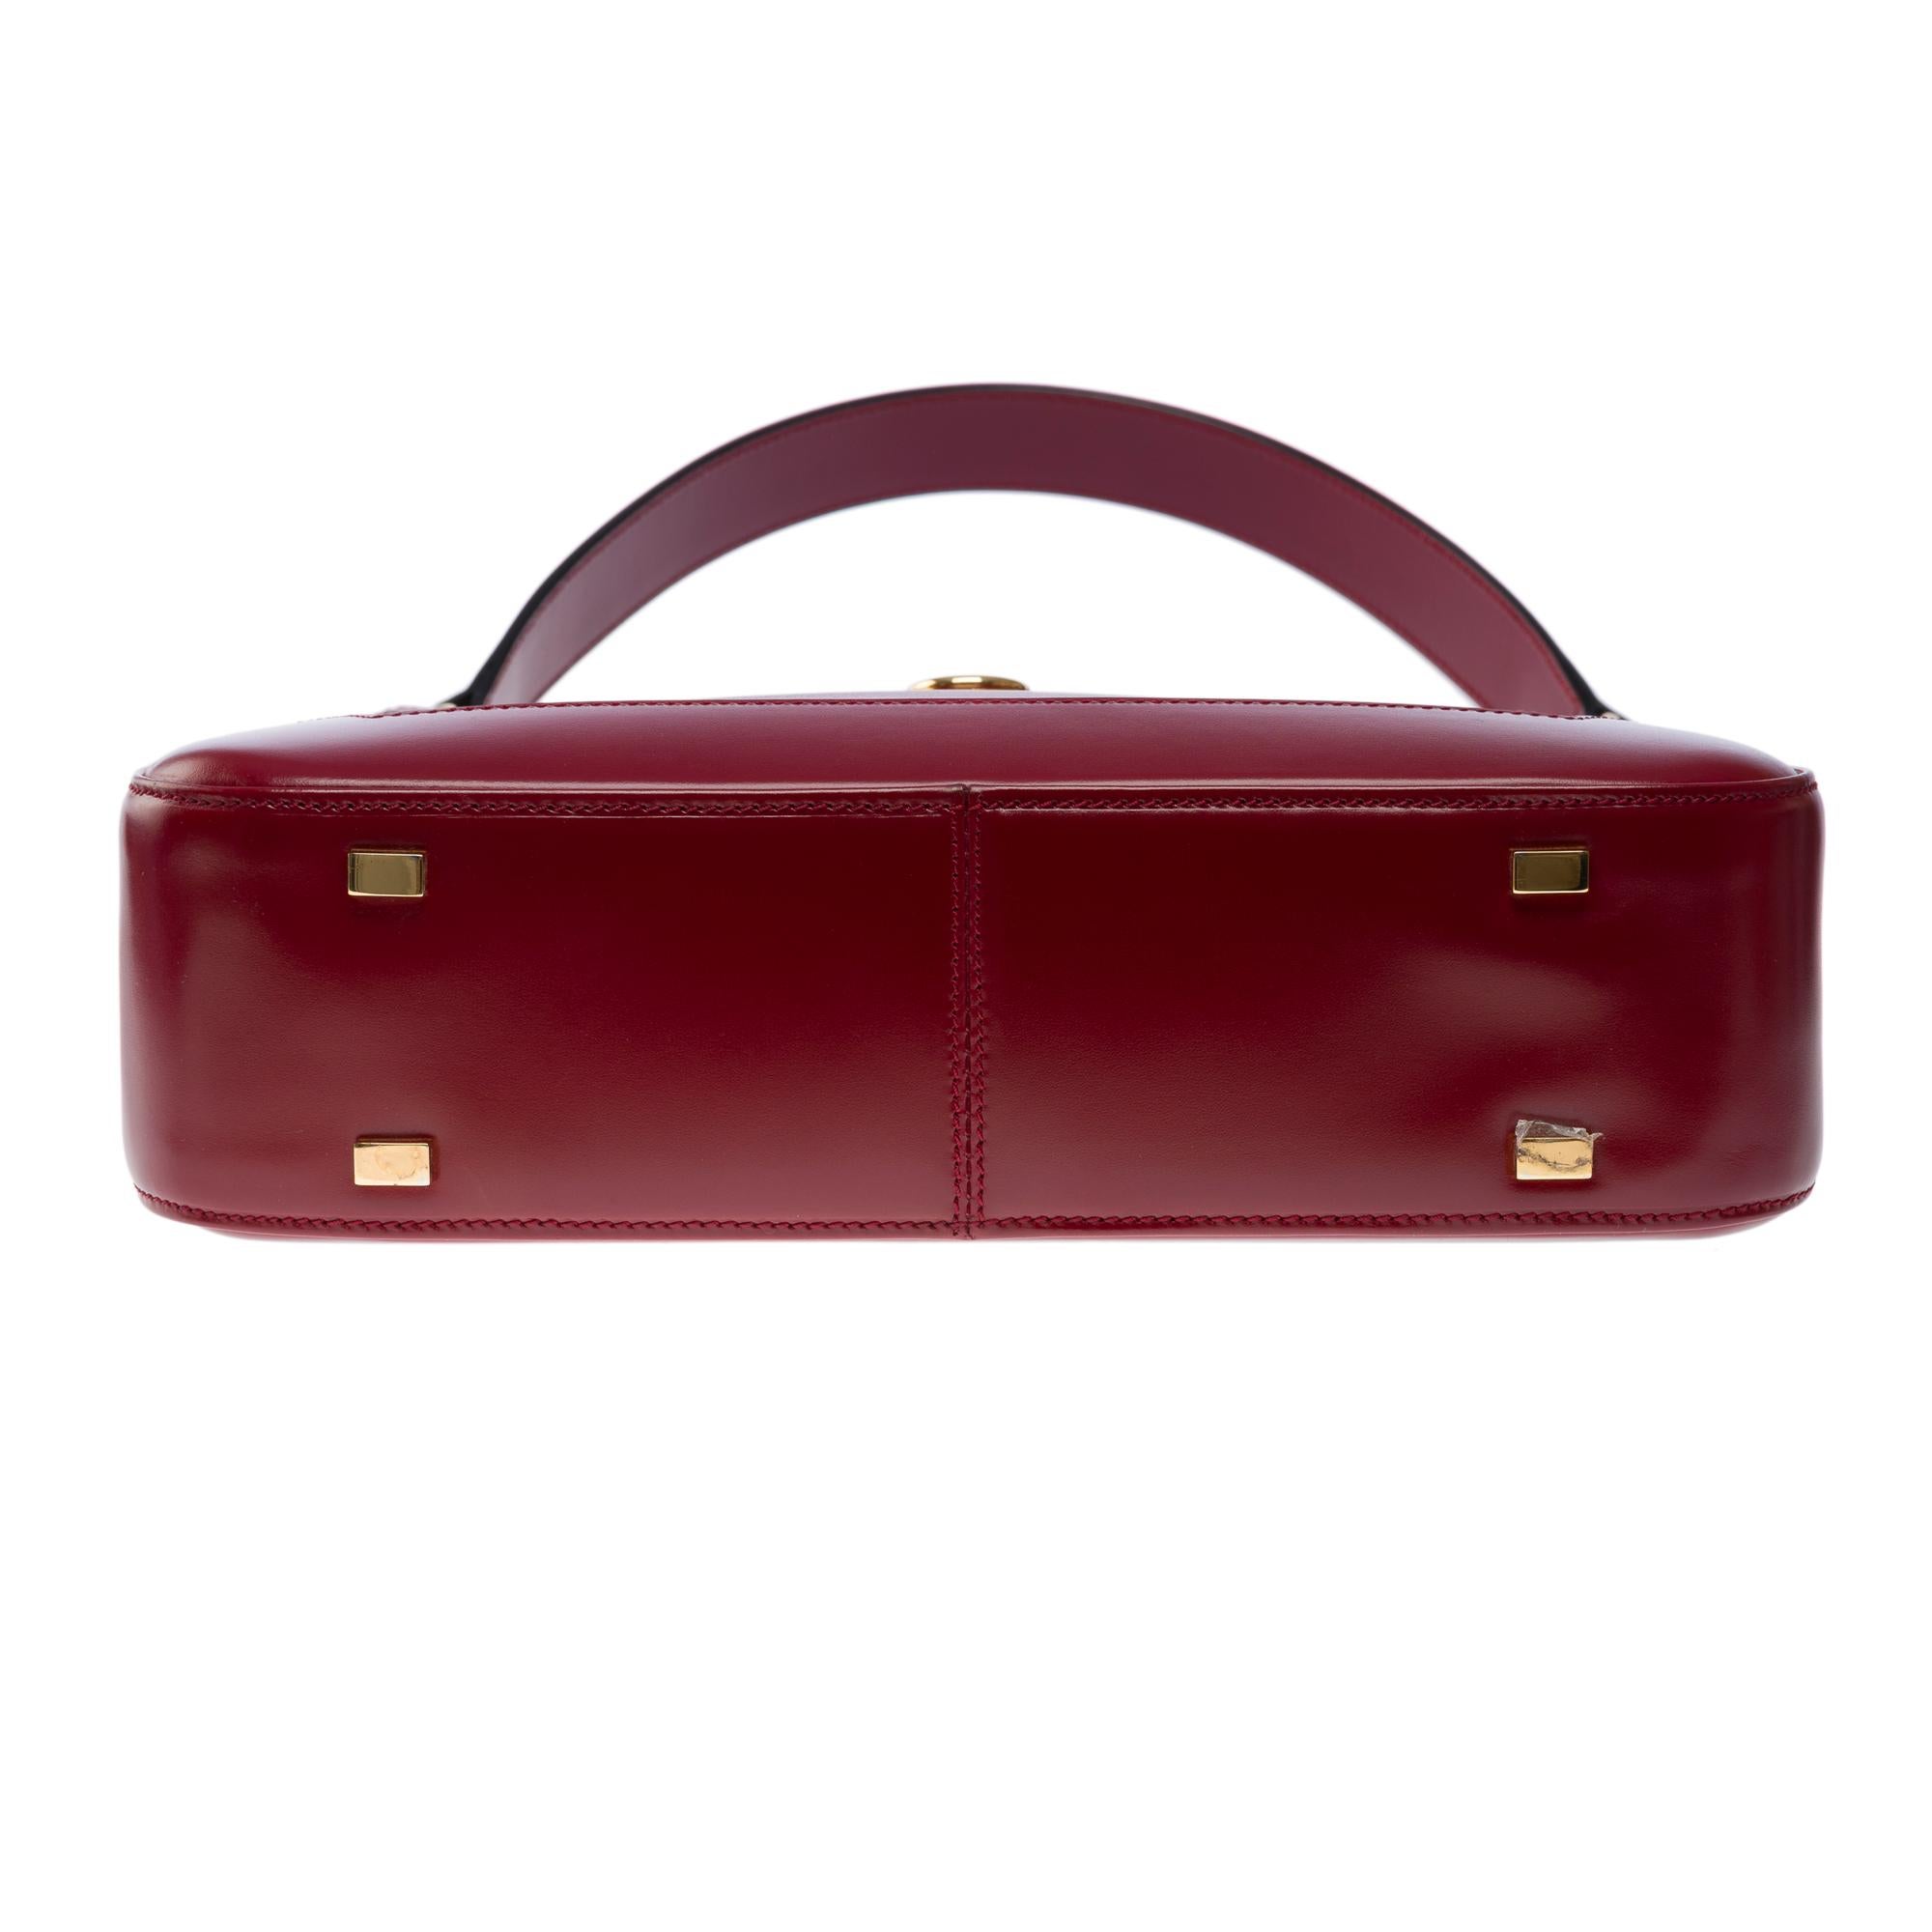 Gorgeous Celine vintage Tote bag in red cherry box calf, GHW 5